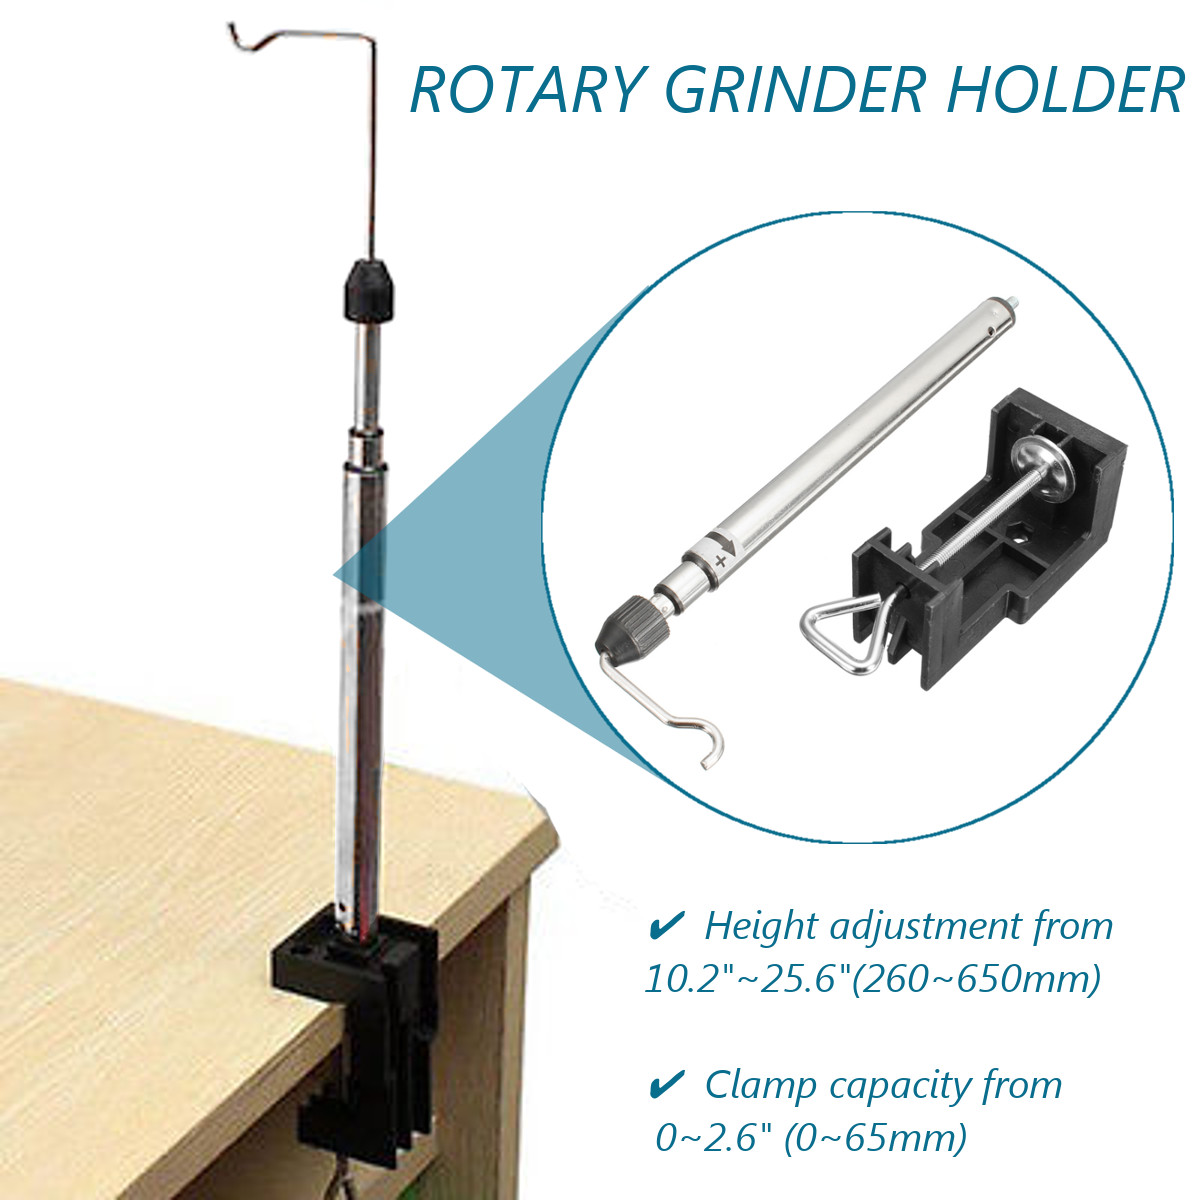 HILDA-Rotary-Grinder-Holder-Flex-Shaft-With-Stand-Electric-Grinder-Hanger-Rotary-Tool-Accessories-1349982-10